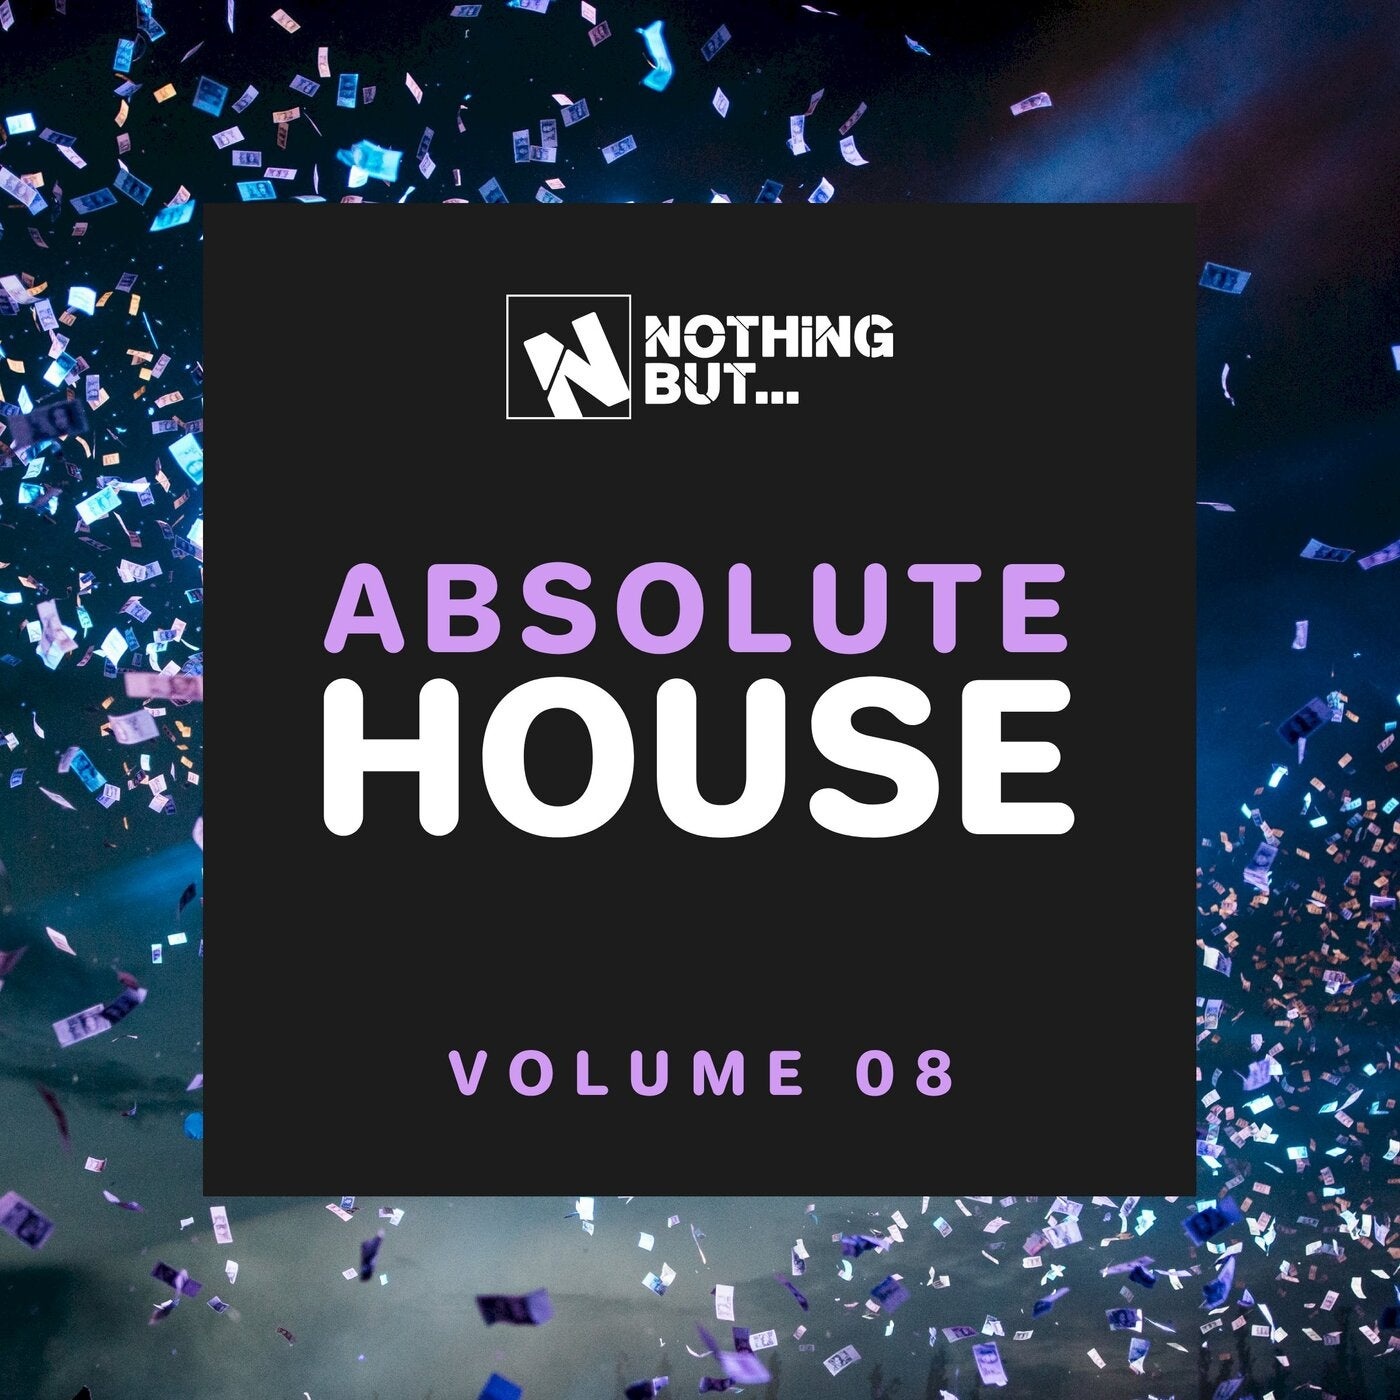 VA - Nothing But... Absolute House, Vol. 08 [NBABHS08]